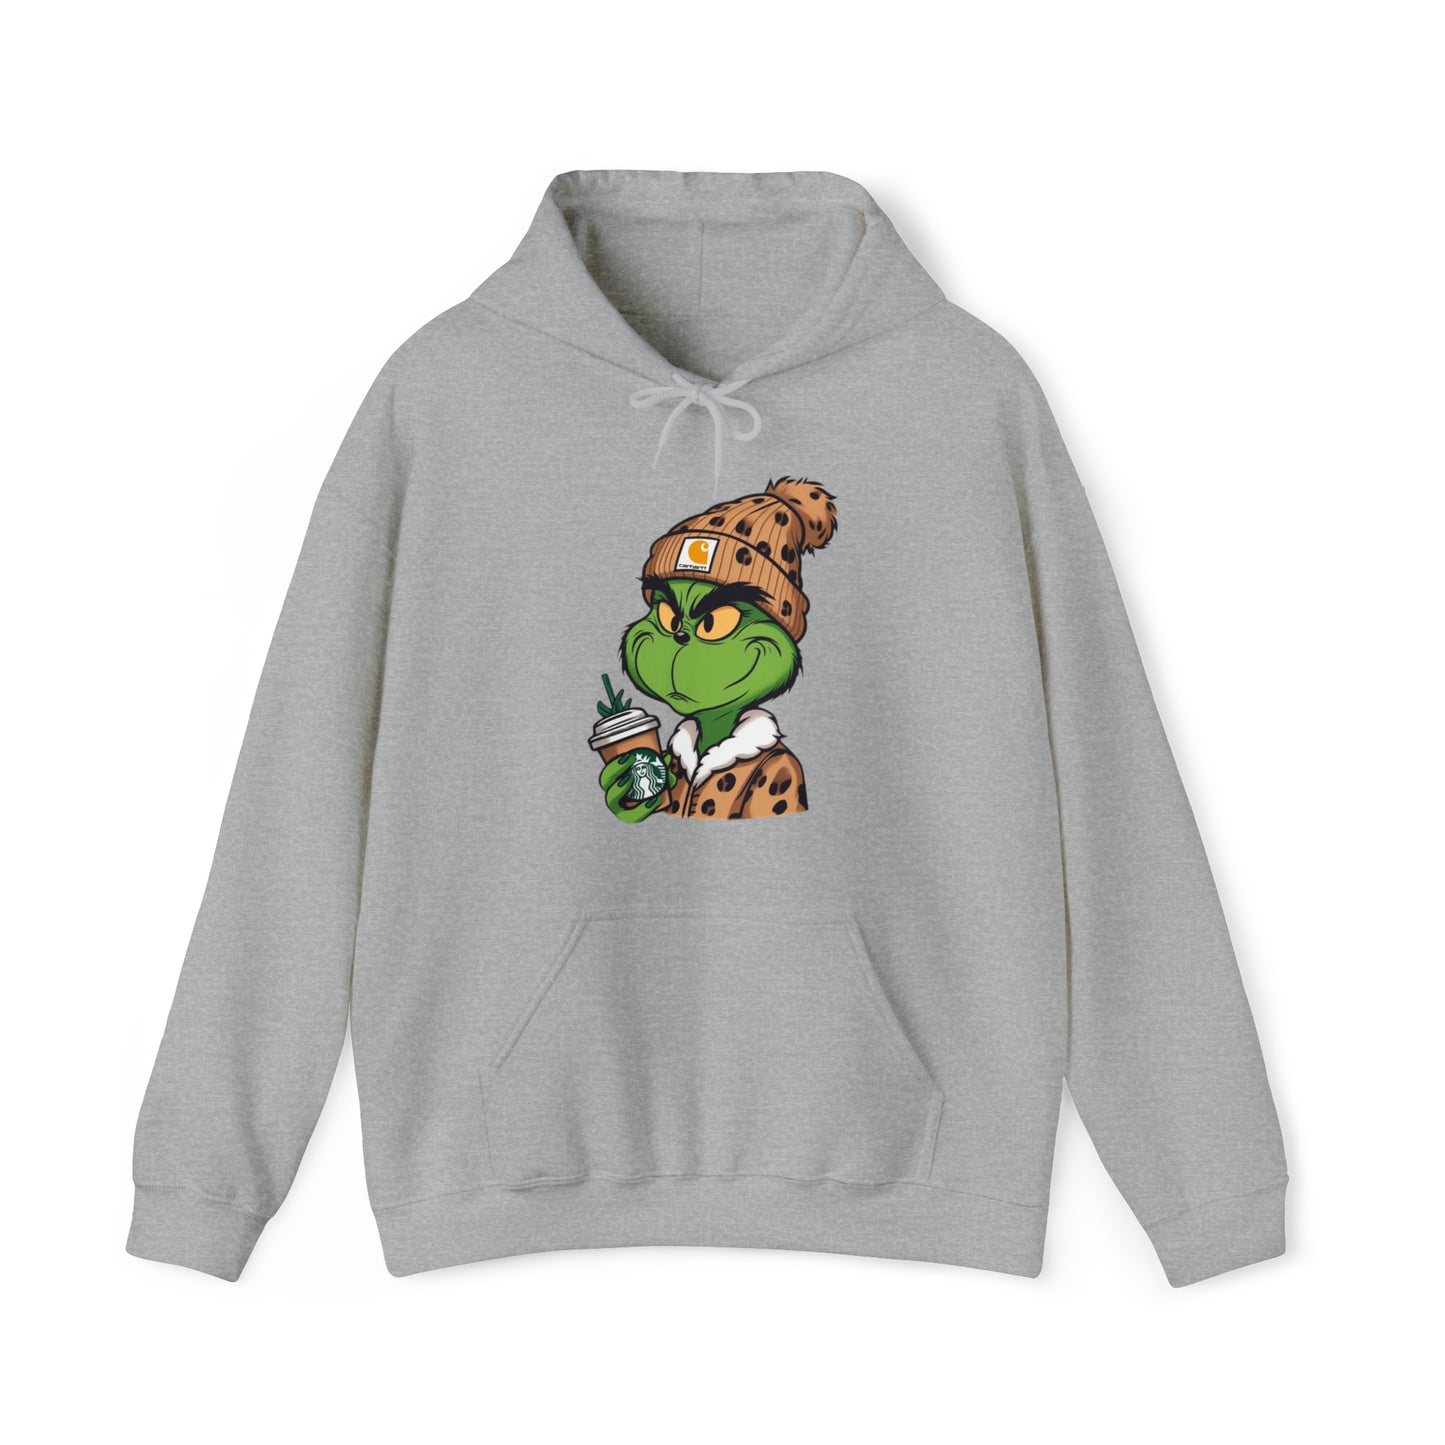 Bougee Grinch Hoodie